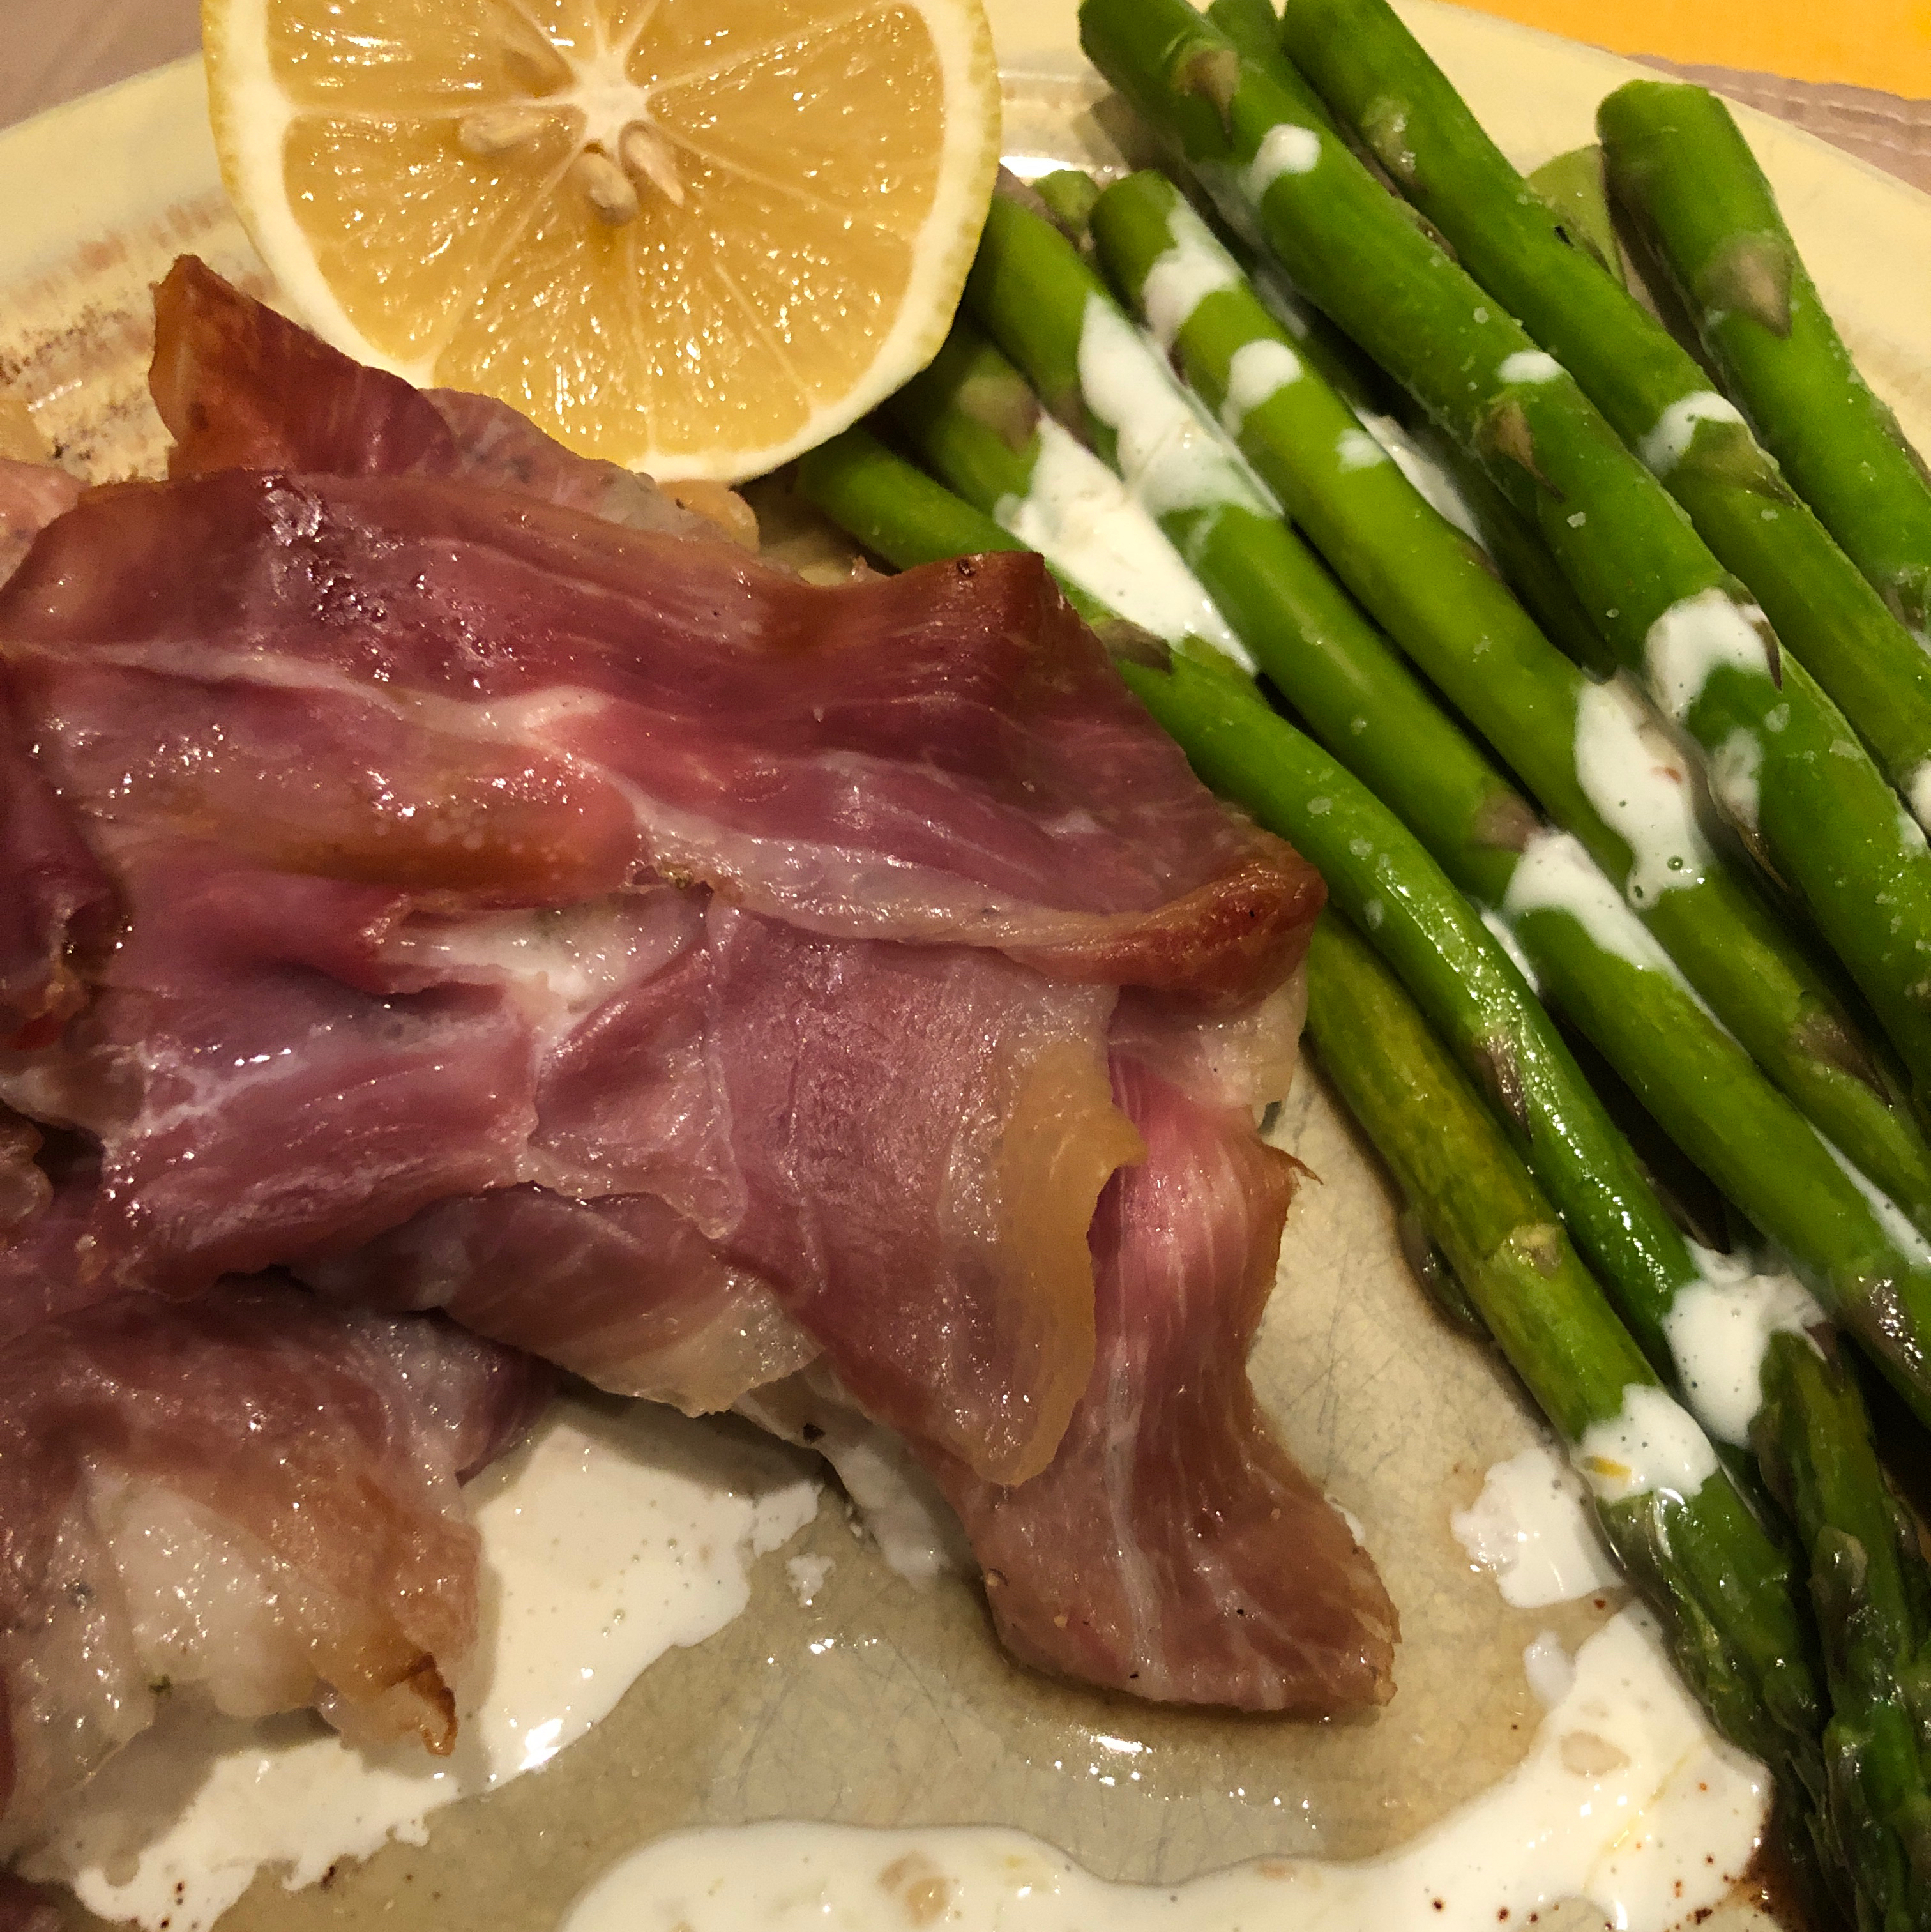 Pancetta-Wrapped Haddock with Lemon Aioli and Roasted Asparagus Luc Peeters